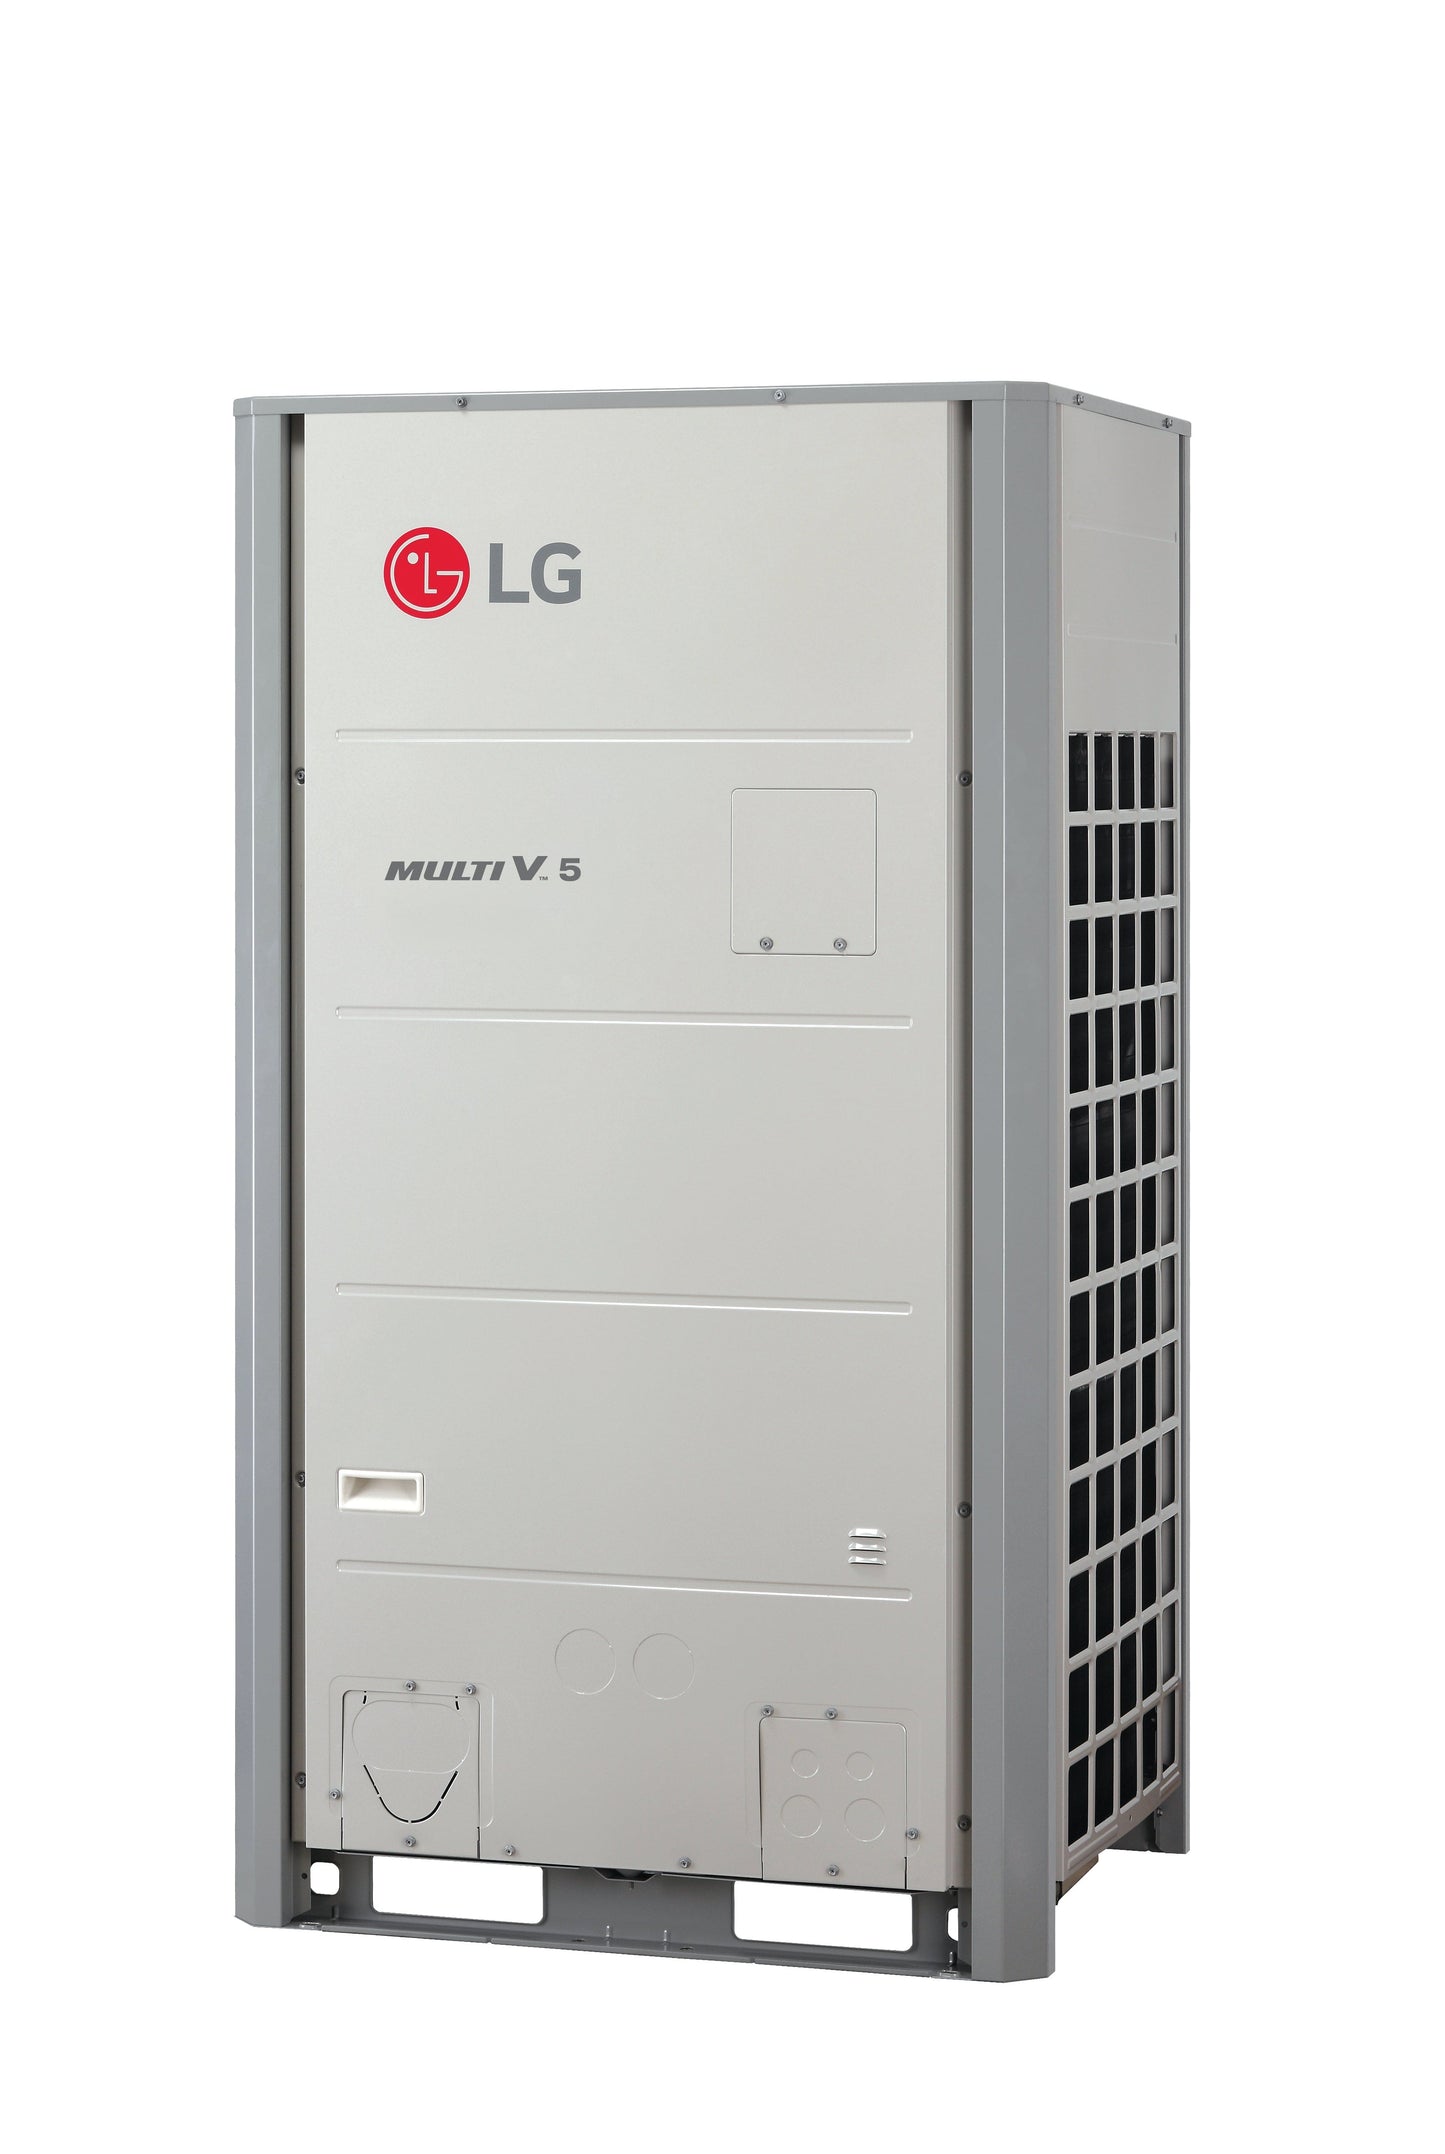 LG MultiV 5 VRF INV System 28.0KW with Dual Sensing Control and High Energy Efficiency - ARUN100LTE5